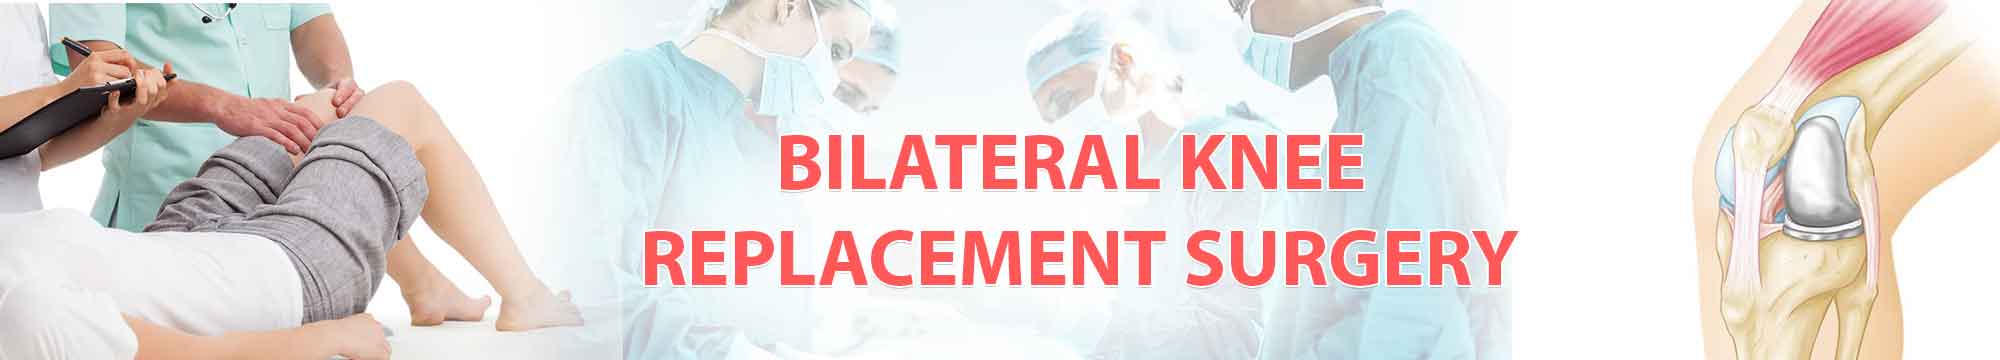 Bilateral Total Knee Replacement India